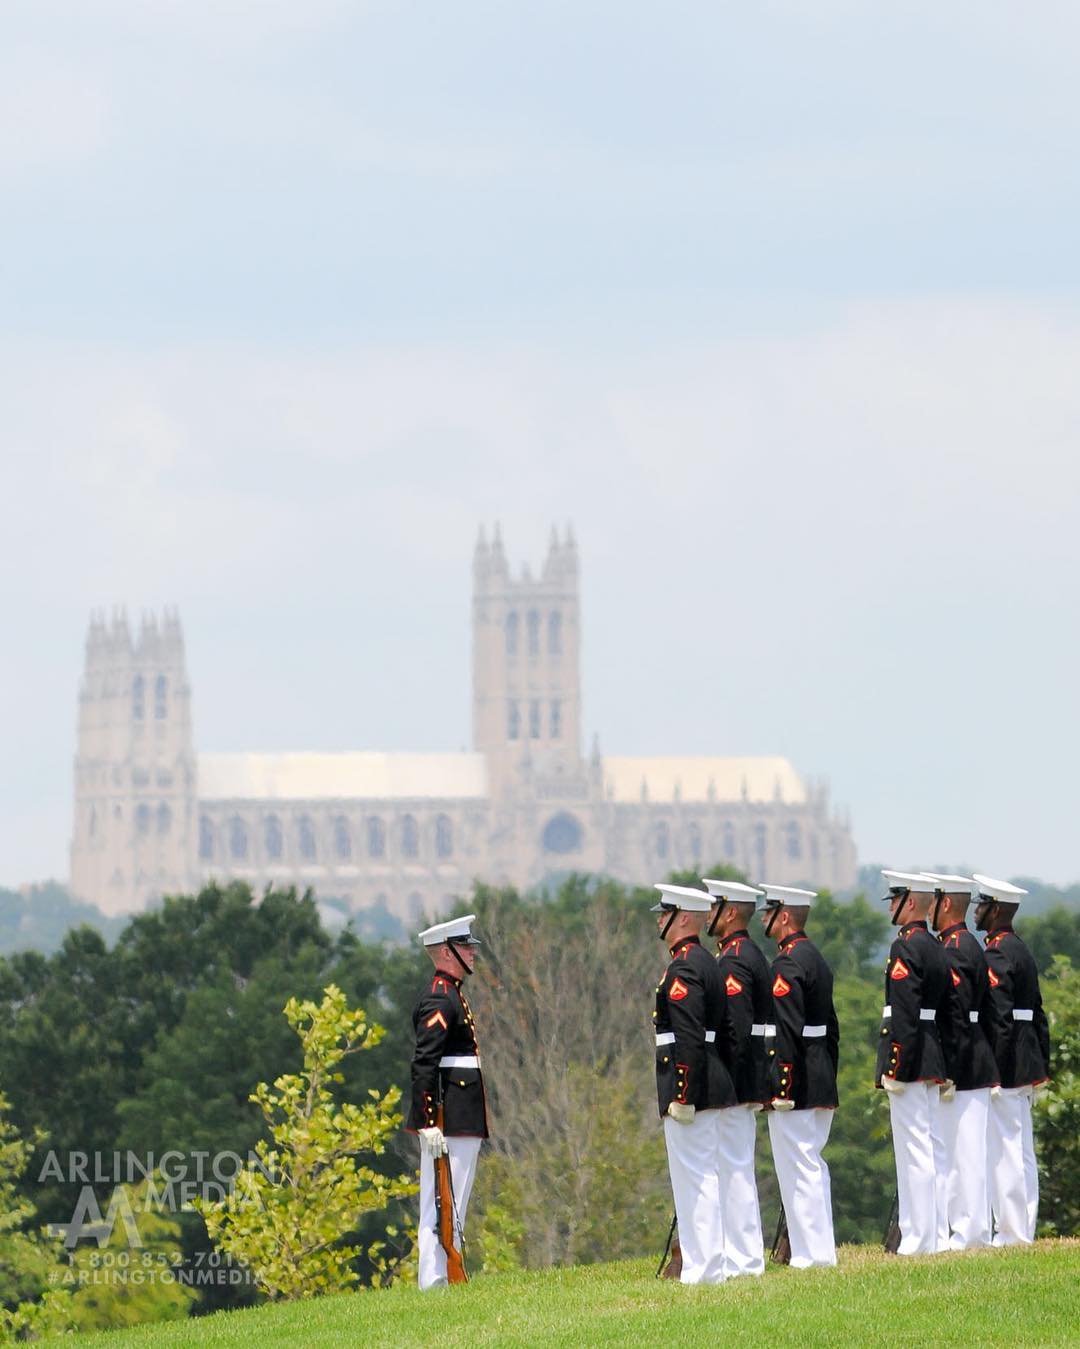 With the @marines from the @marinebarracks at @arlingtonnatl with the @wncathedral in the background 
#Arlington⠀
#ArlingtonMedia⠀
#ArlingtonCemetery⠀
#ArlingtonNationalCemetery⠀